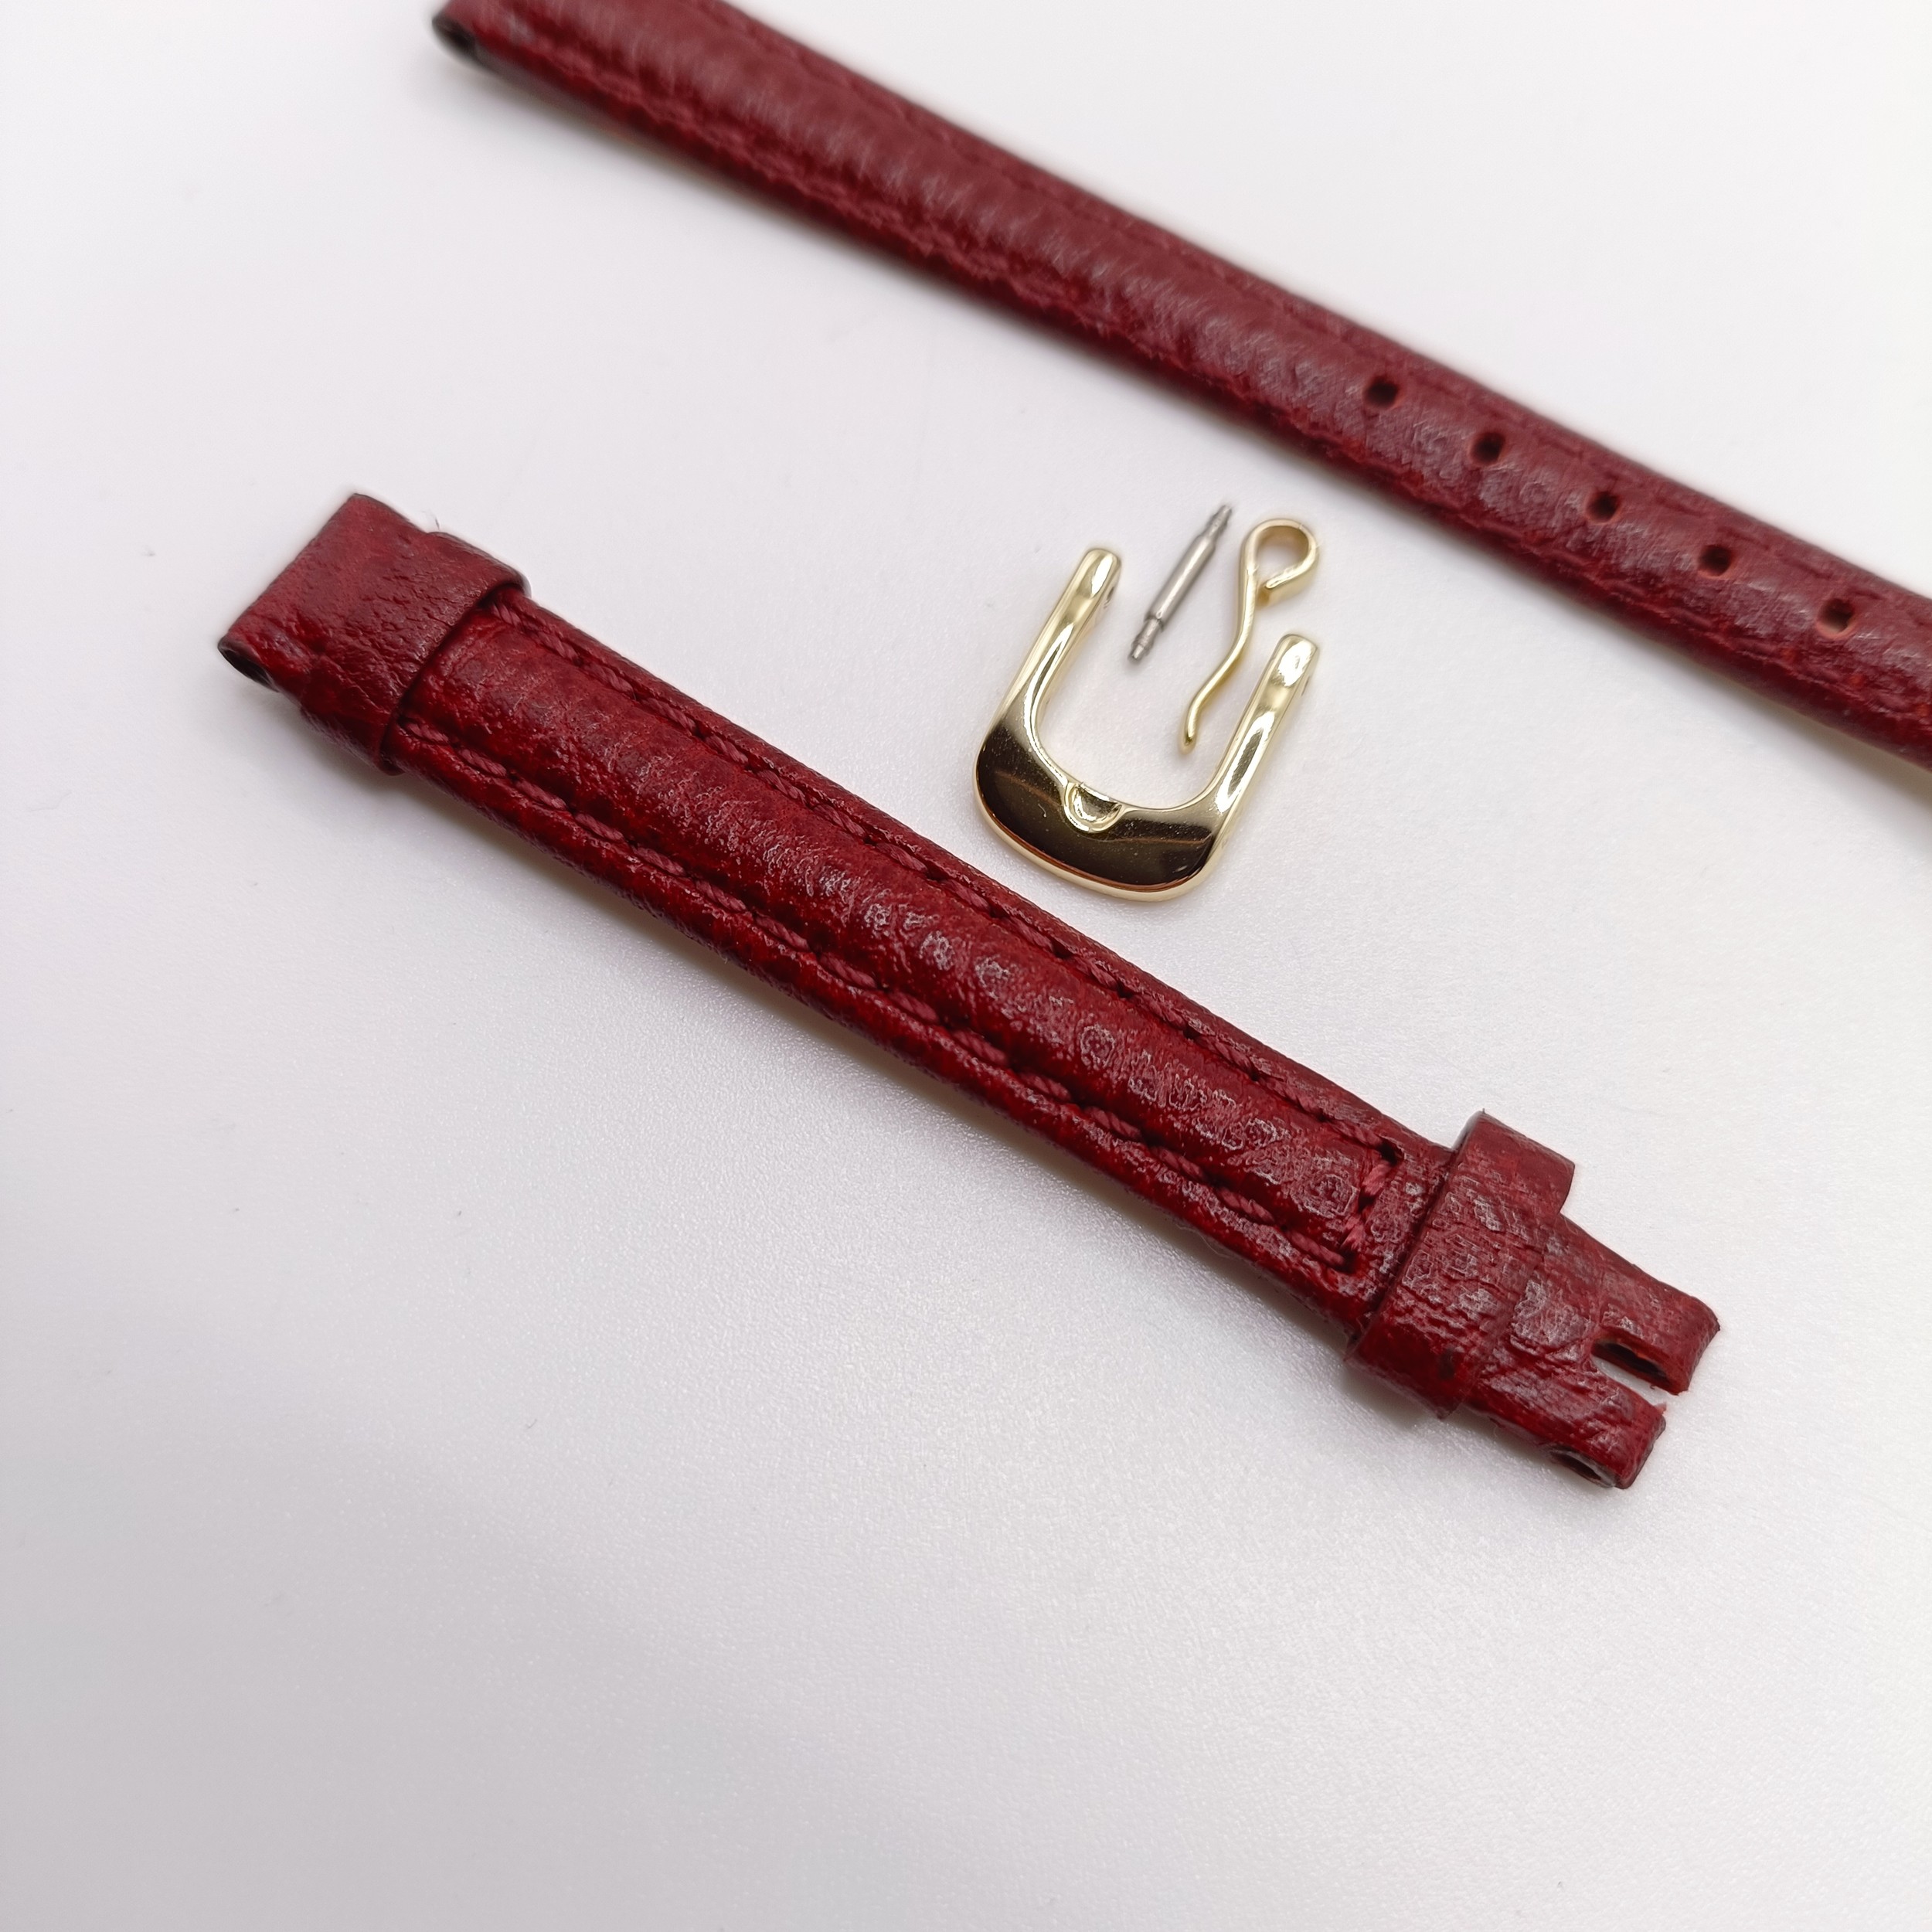 A brown/red leather watch strap, with a fastener, lug width 10mm - Image 2 of 5